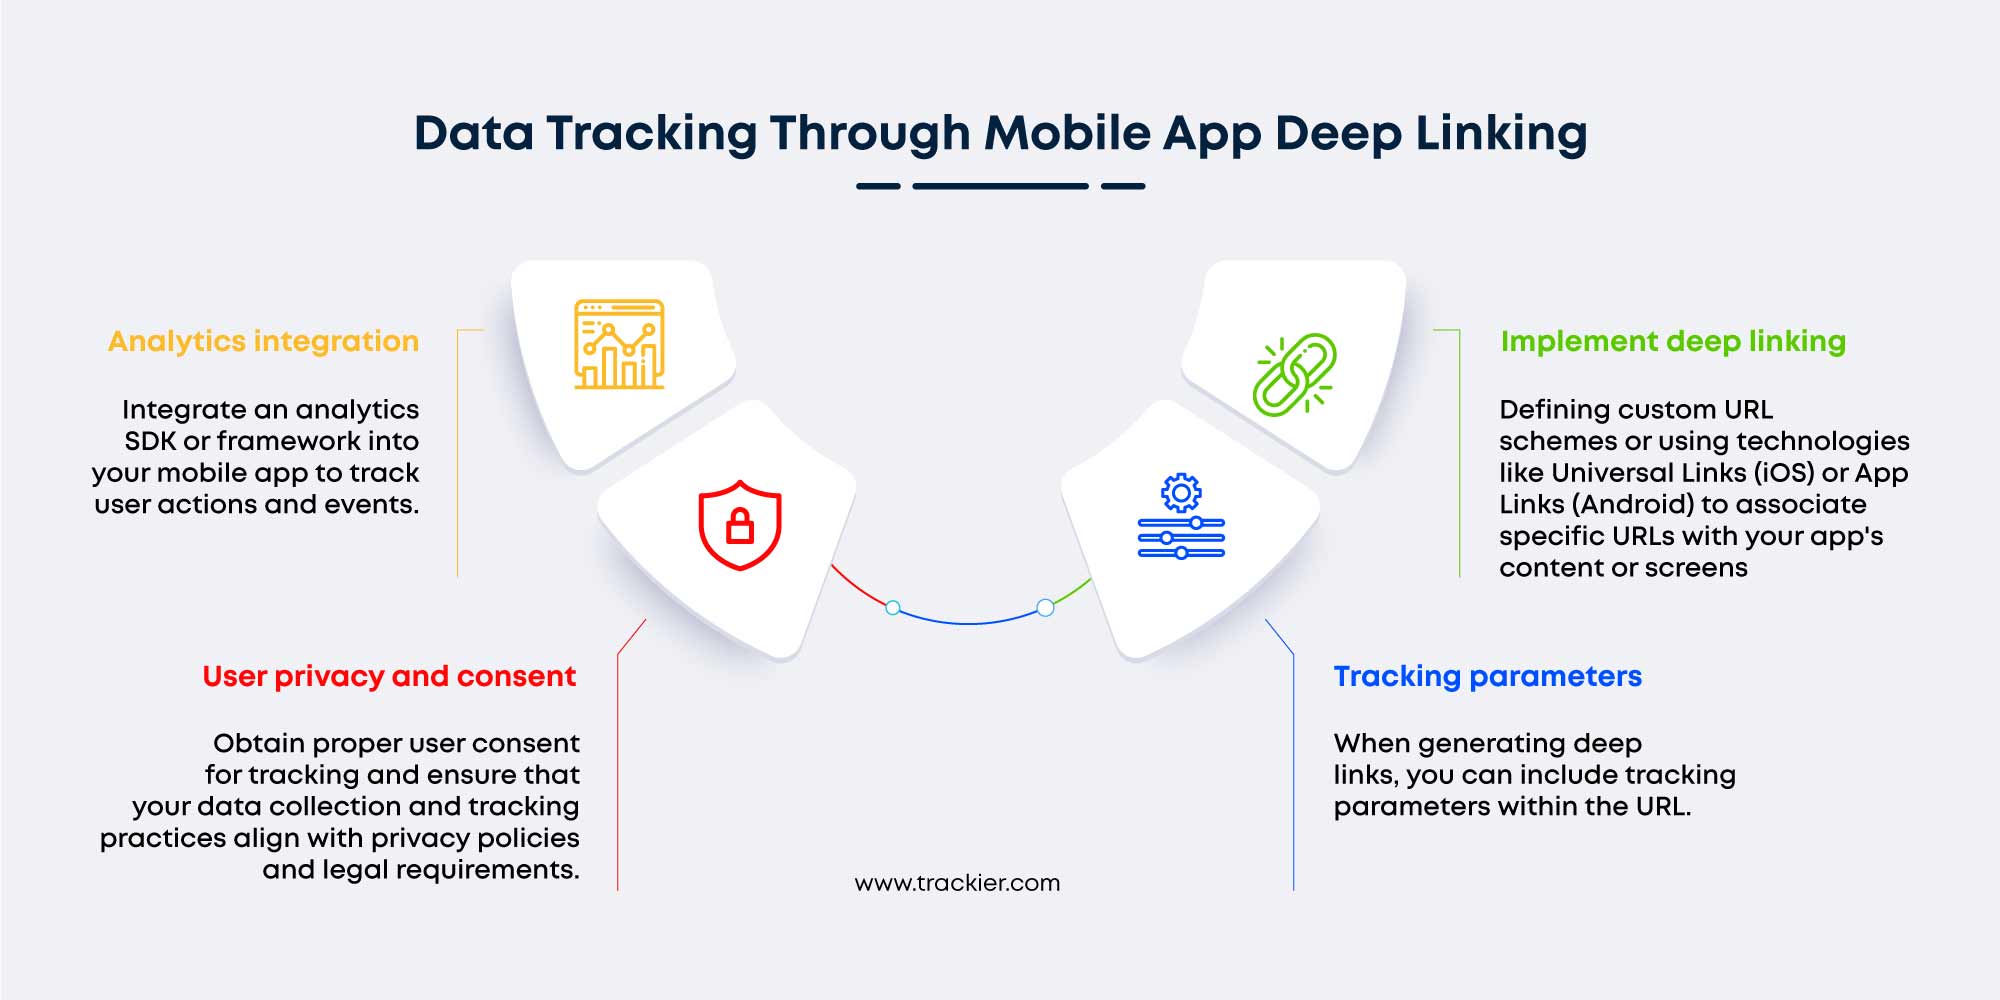 Deep linking is a technique that allows mobile apps to link to specific content or pages within another app. 